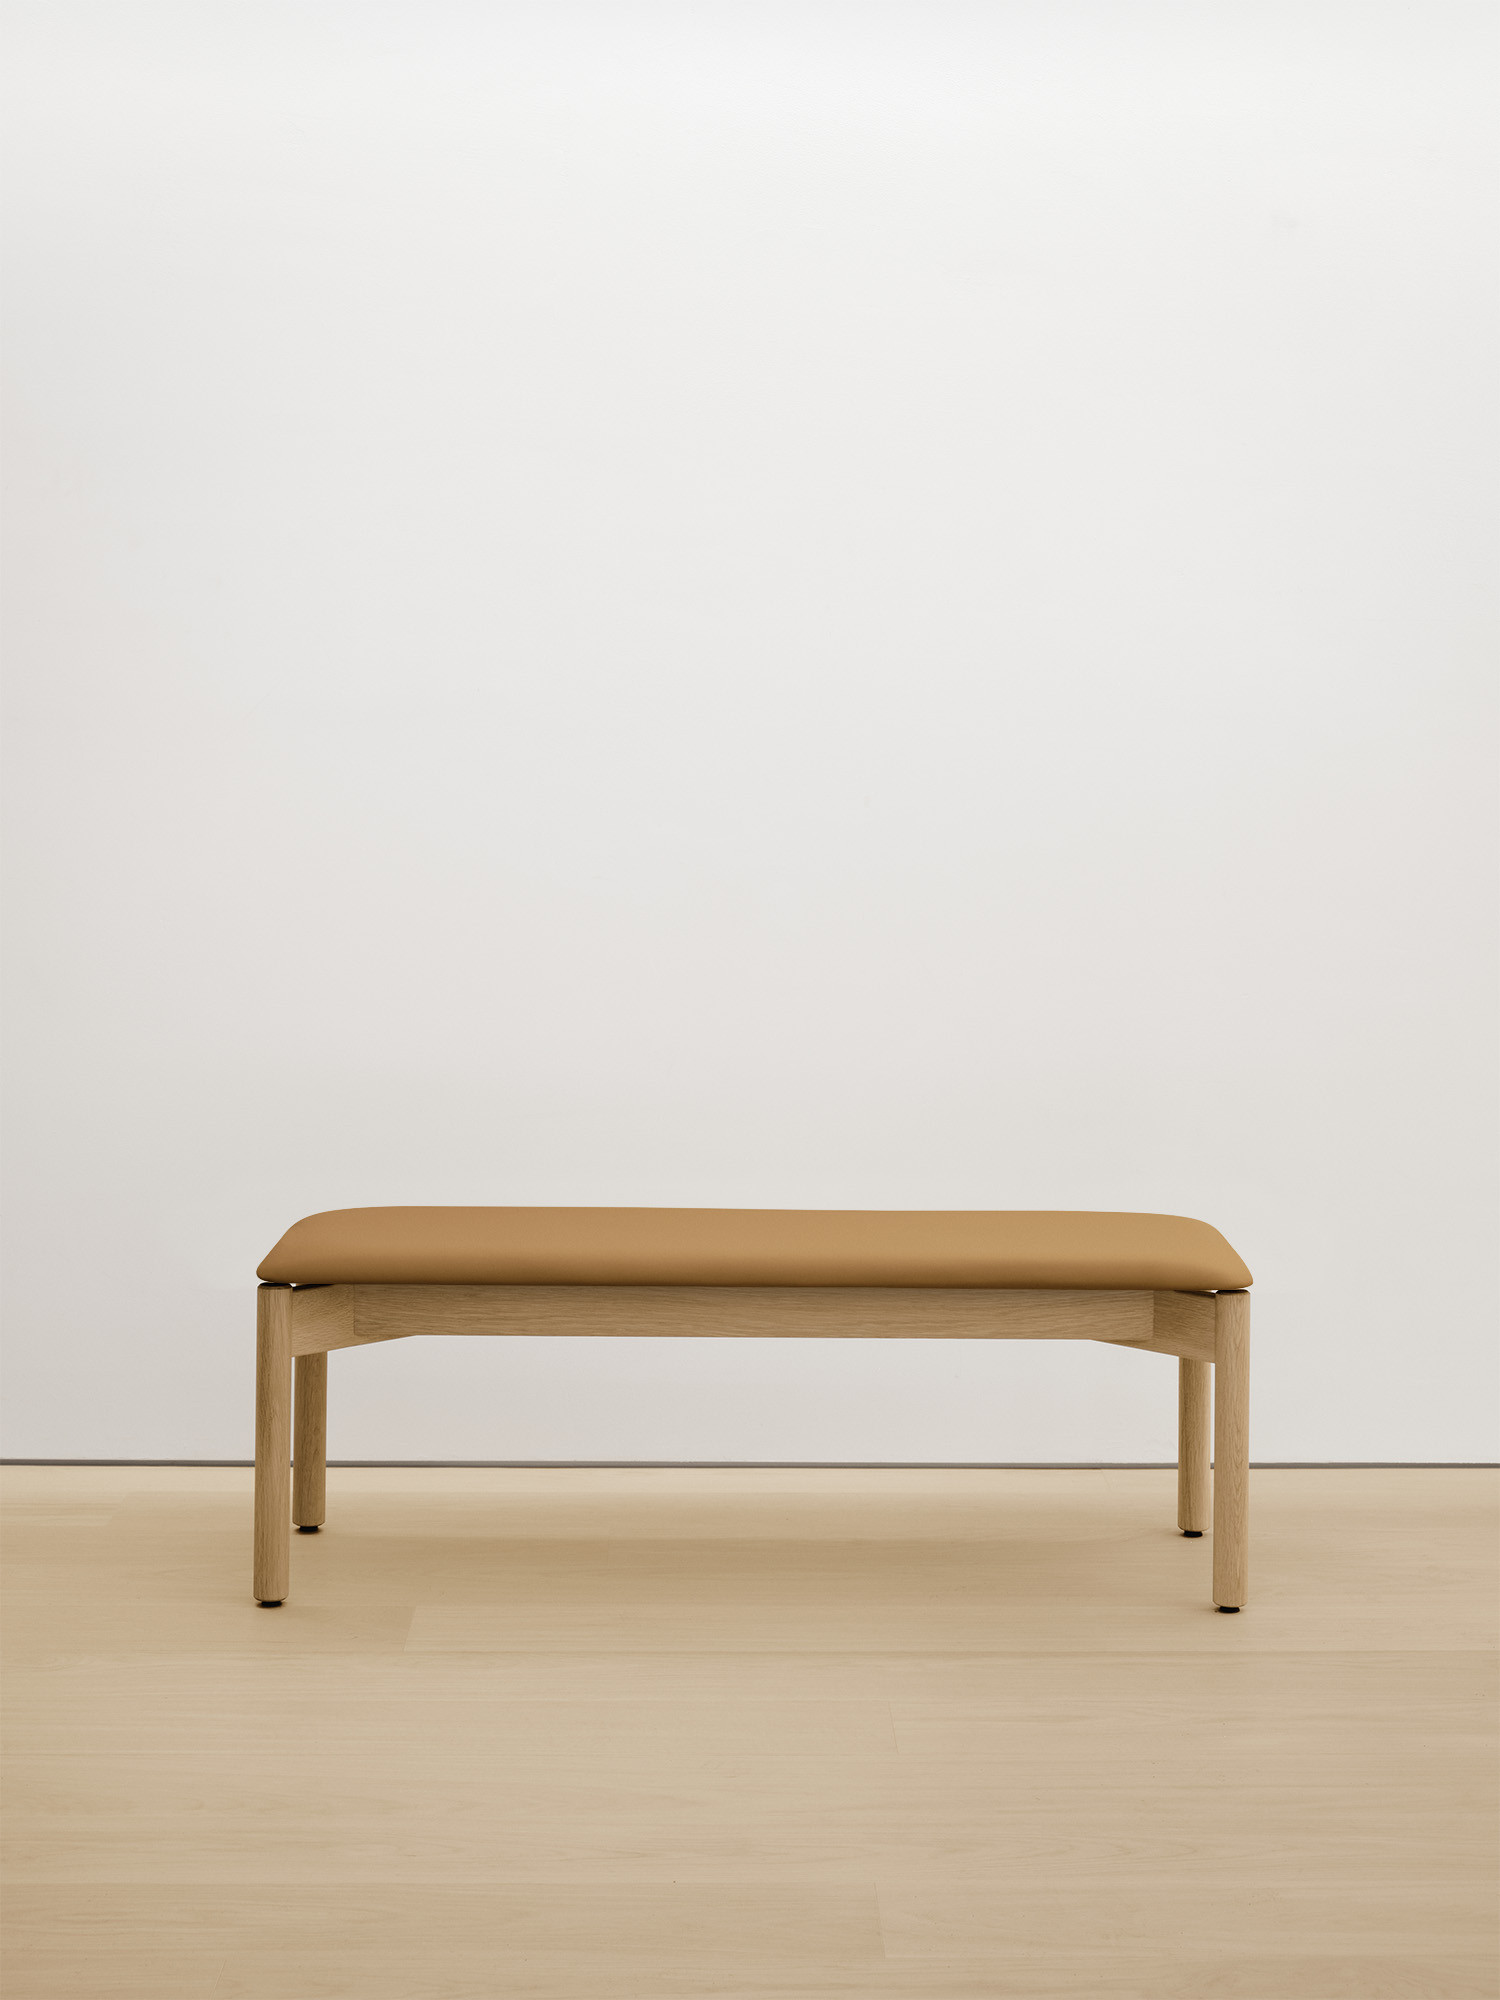  bench with  upholstered seat